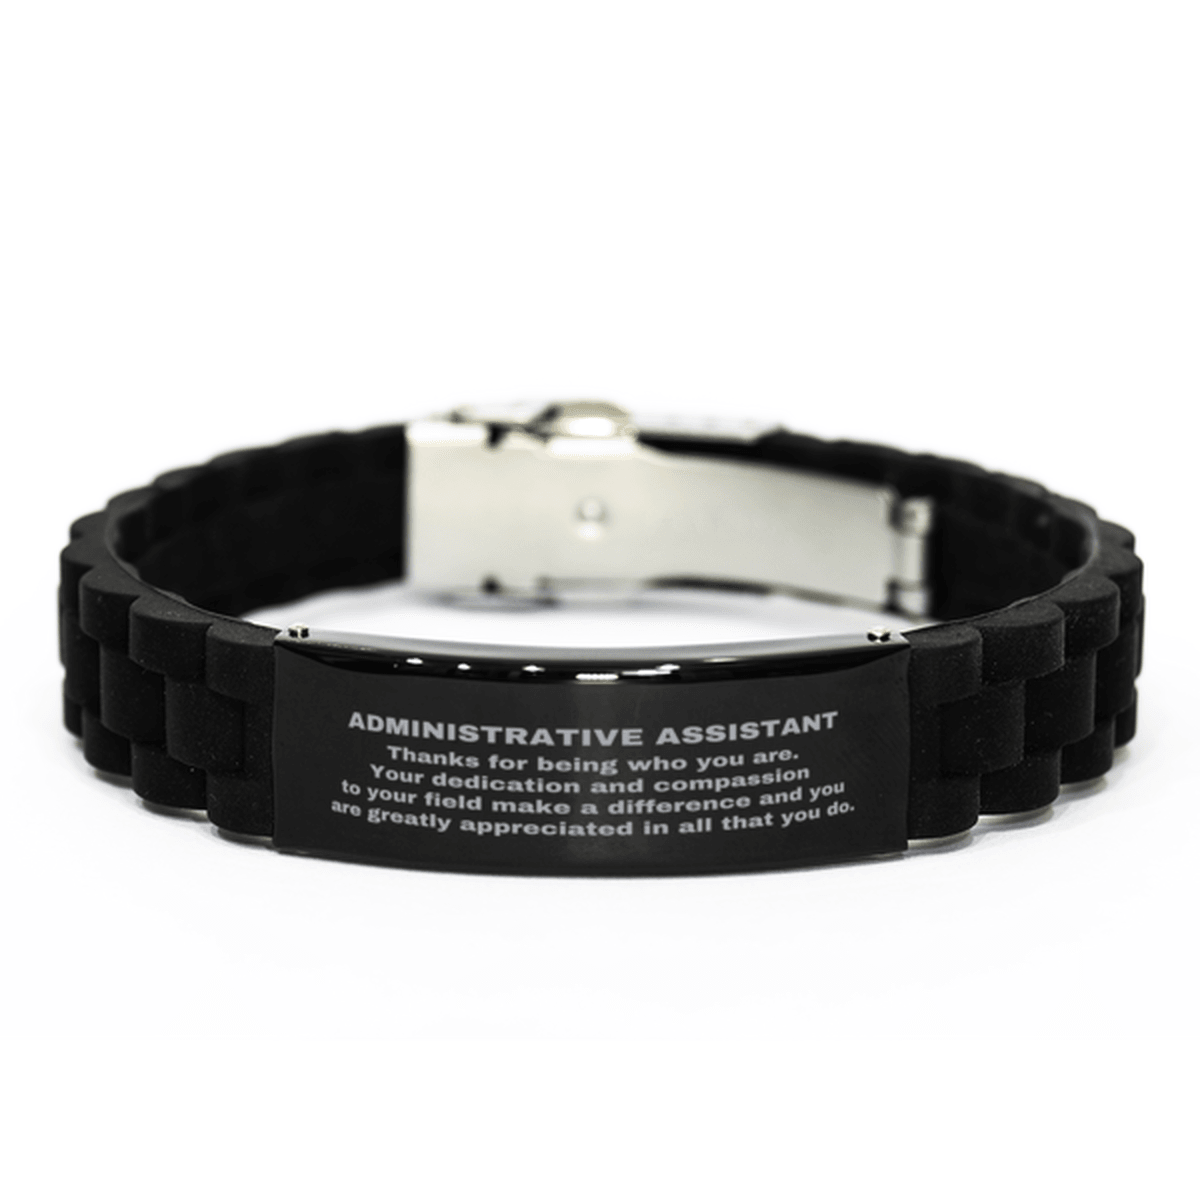 Administrative Assistant Black Glidelock Clasp Engraved Bracelet - Thanks for being who you are - Birthday Christmas Jewelry Gifts Coworkers Colleague Boss - Mallard Moon Gift Shop